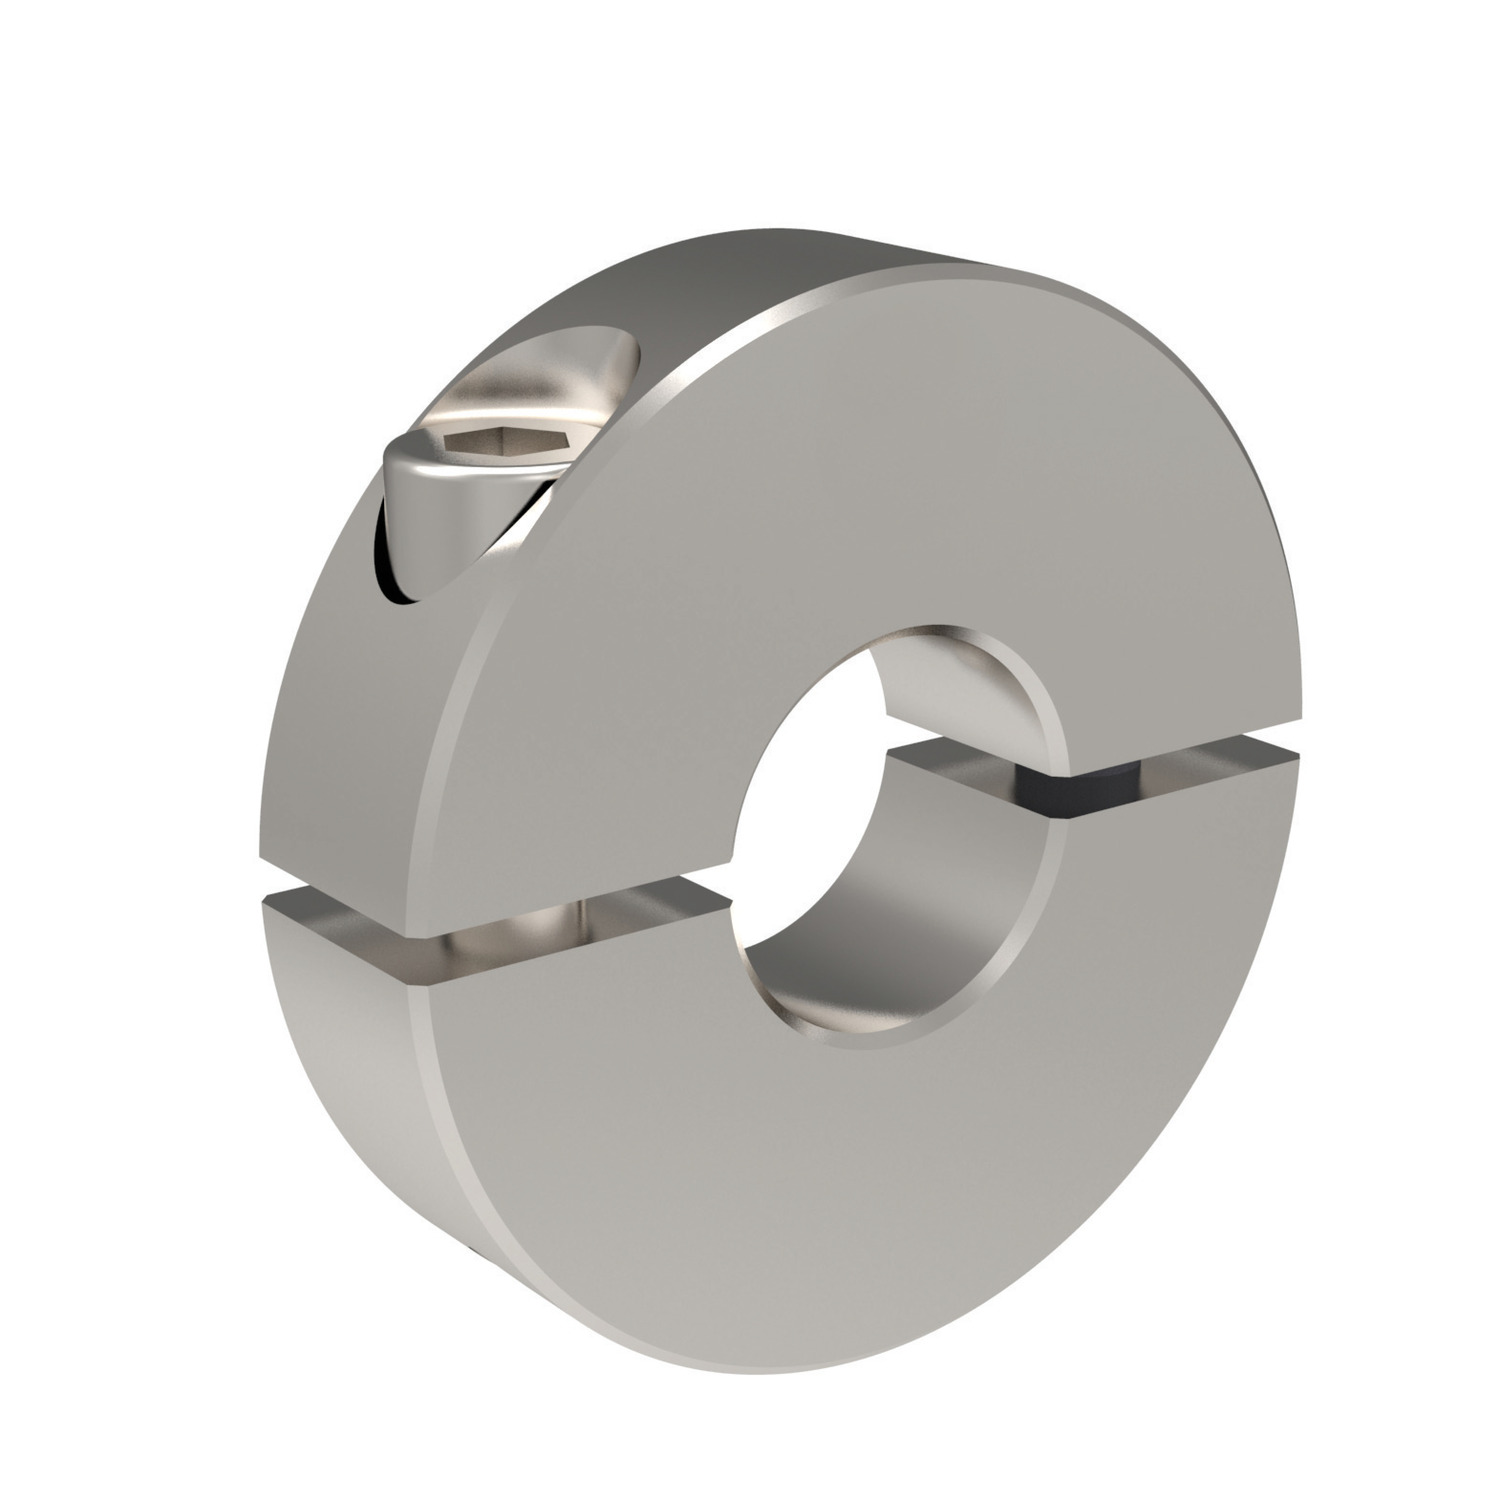 Collars Stainless and regular steel shaft collars available in one or two piece designs. 